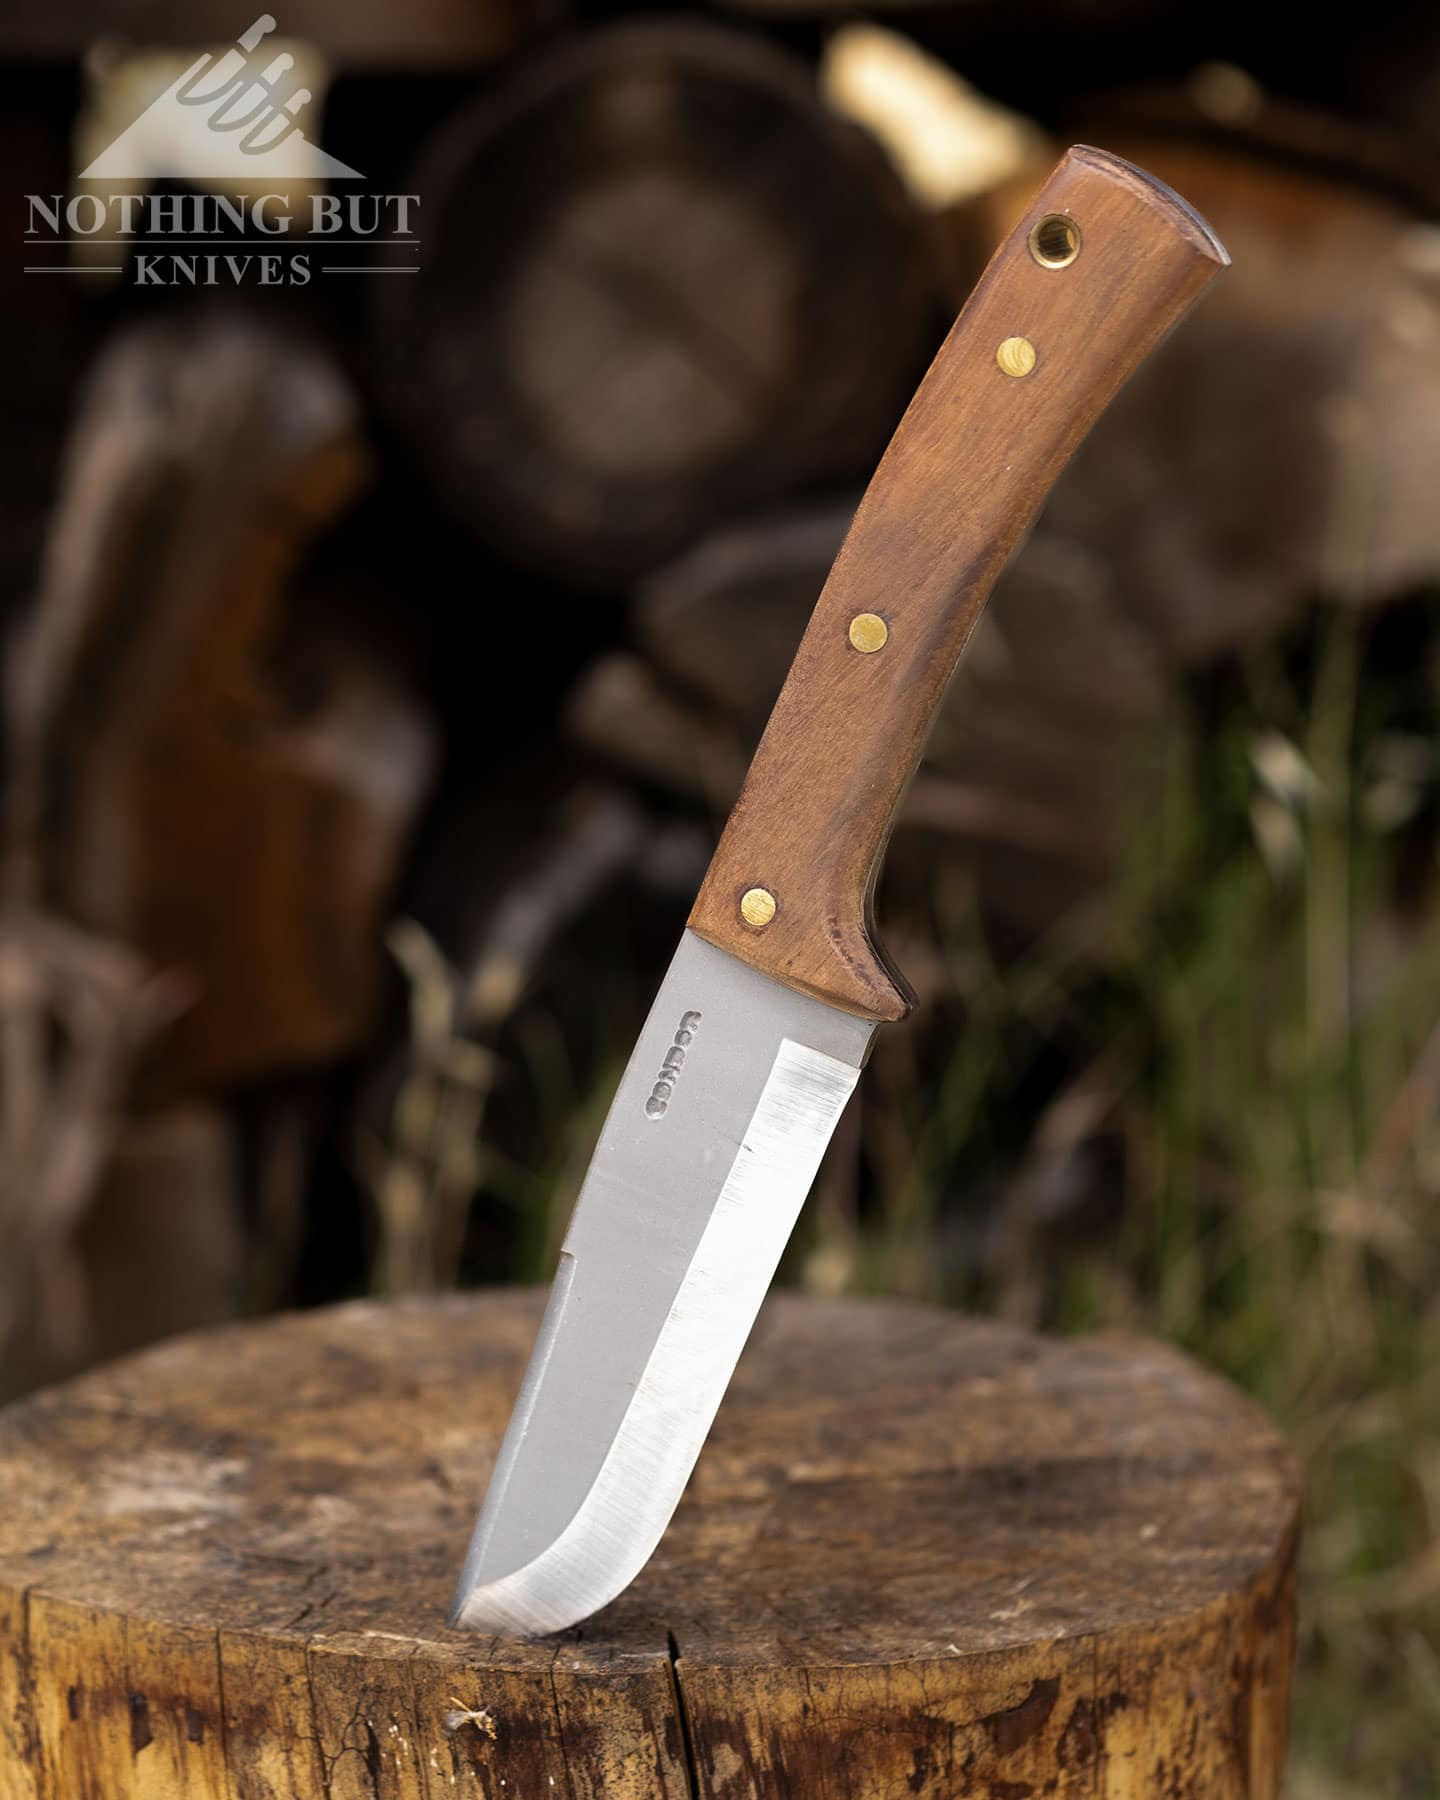 This knife was designed to be a chopper first and foremost. Everything else is an afterthought. 